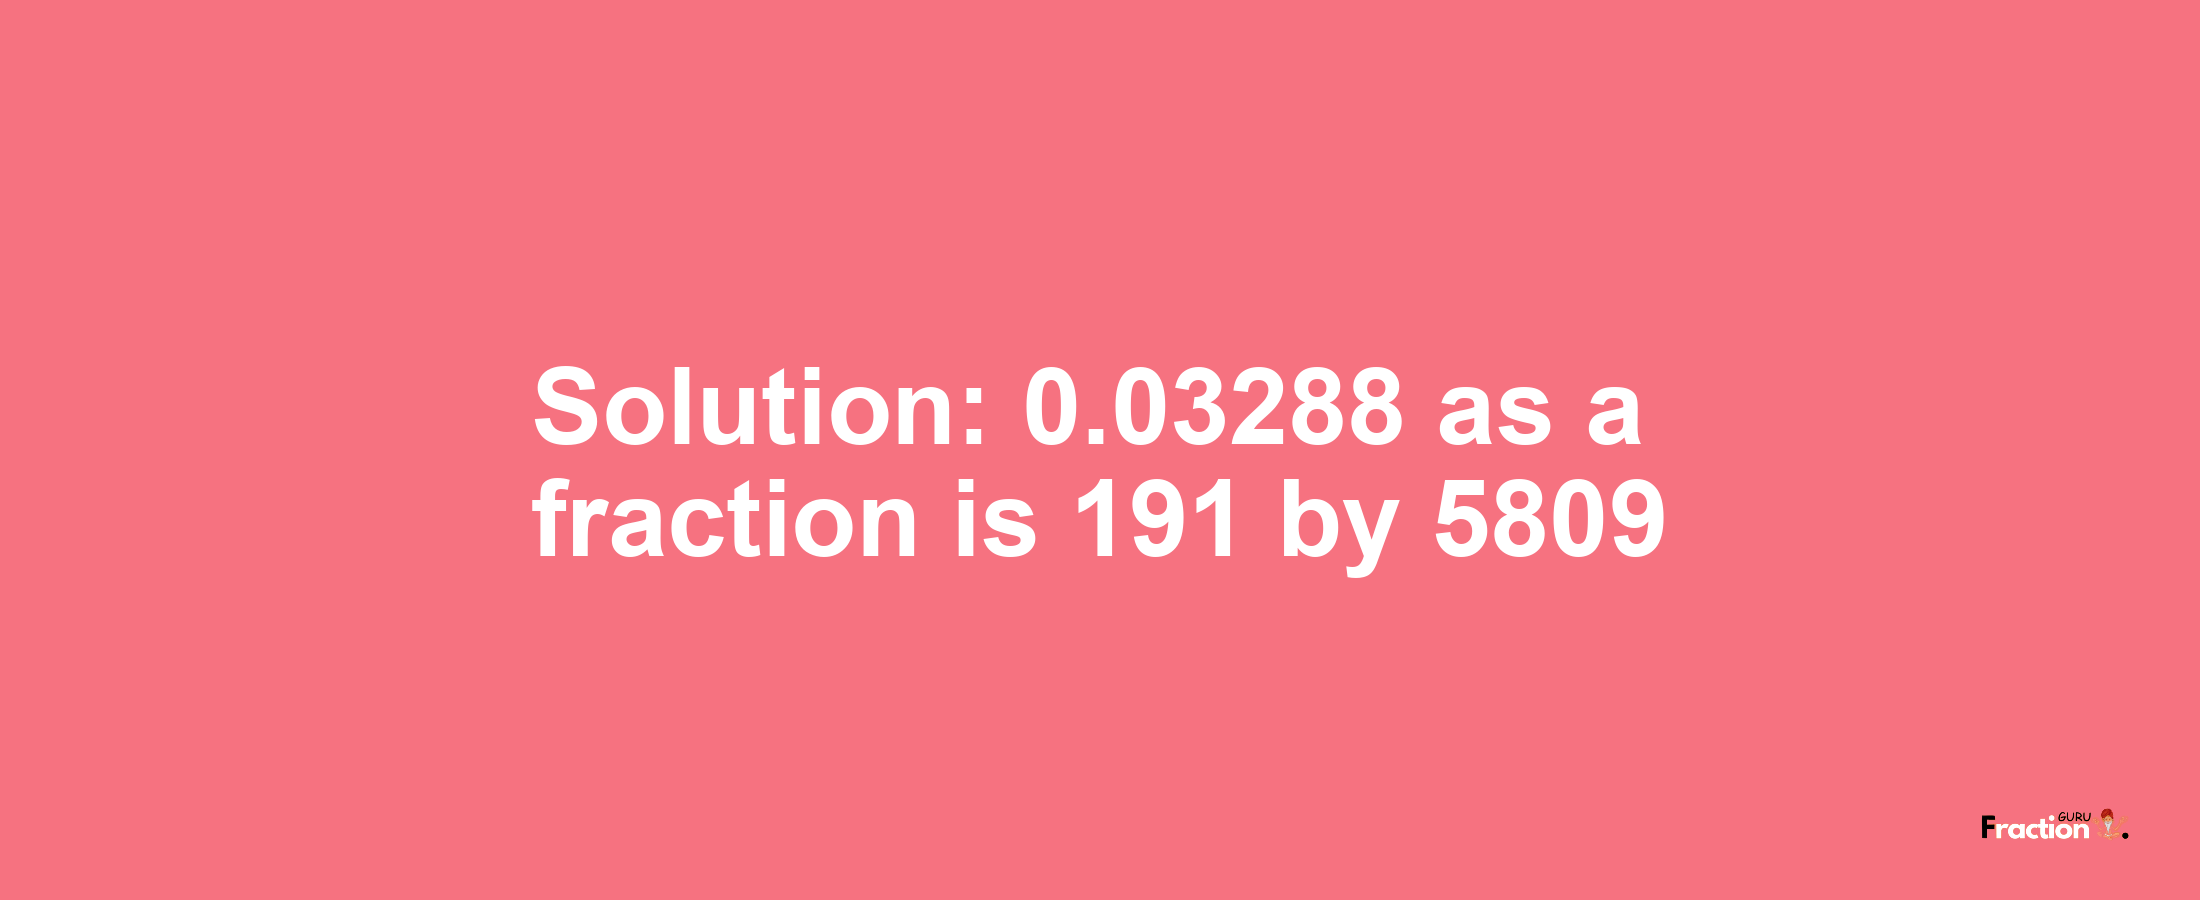 Solution:0.03288 as a fraction is 191/5809